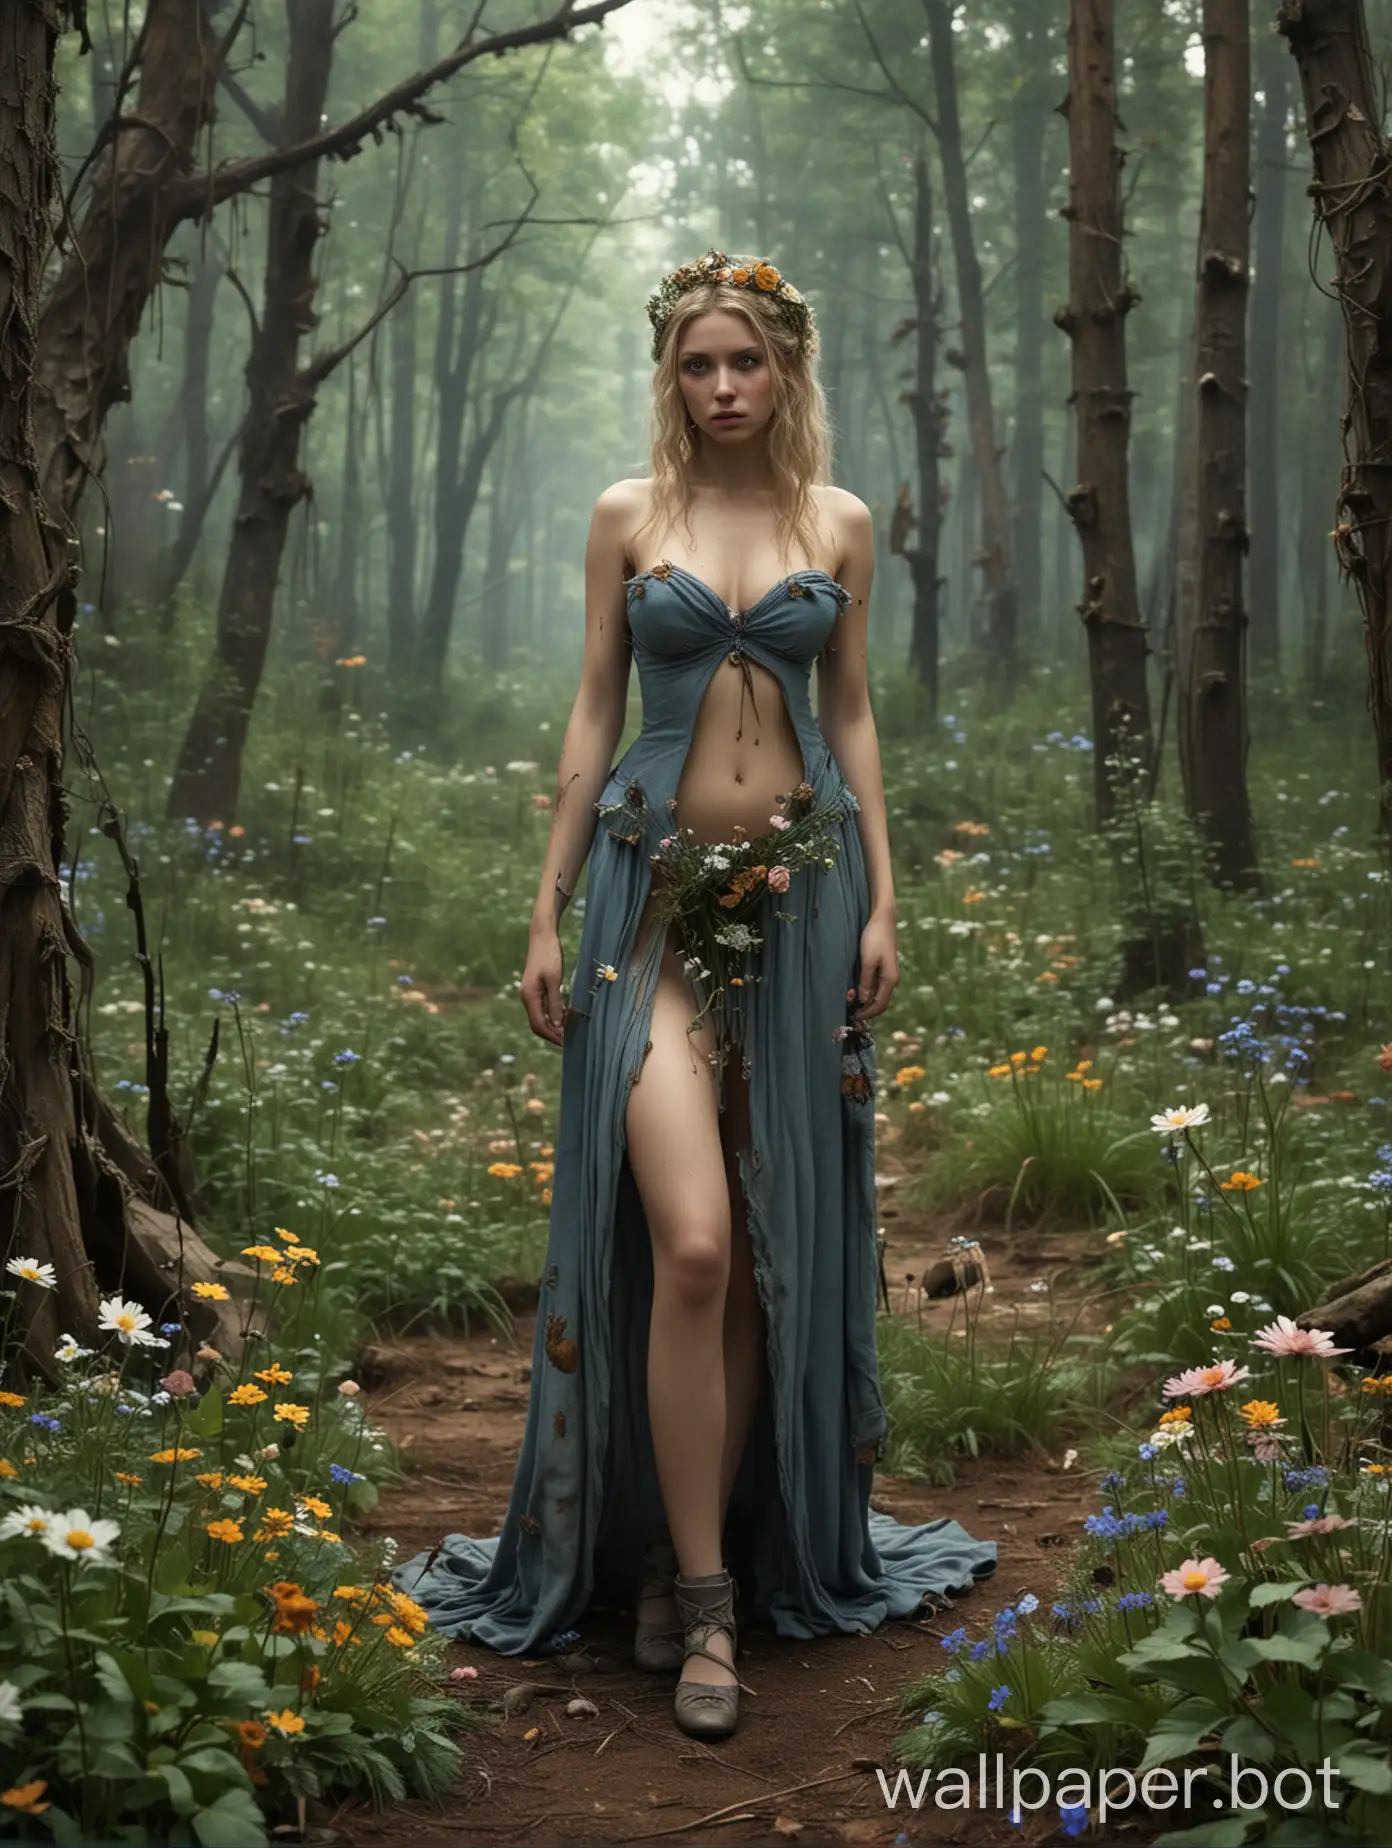 A post apocalyptic setting where Cinderella is living in the forest and only had flowers as objects to cover her modesty partially nude